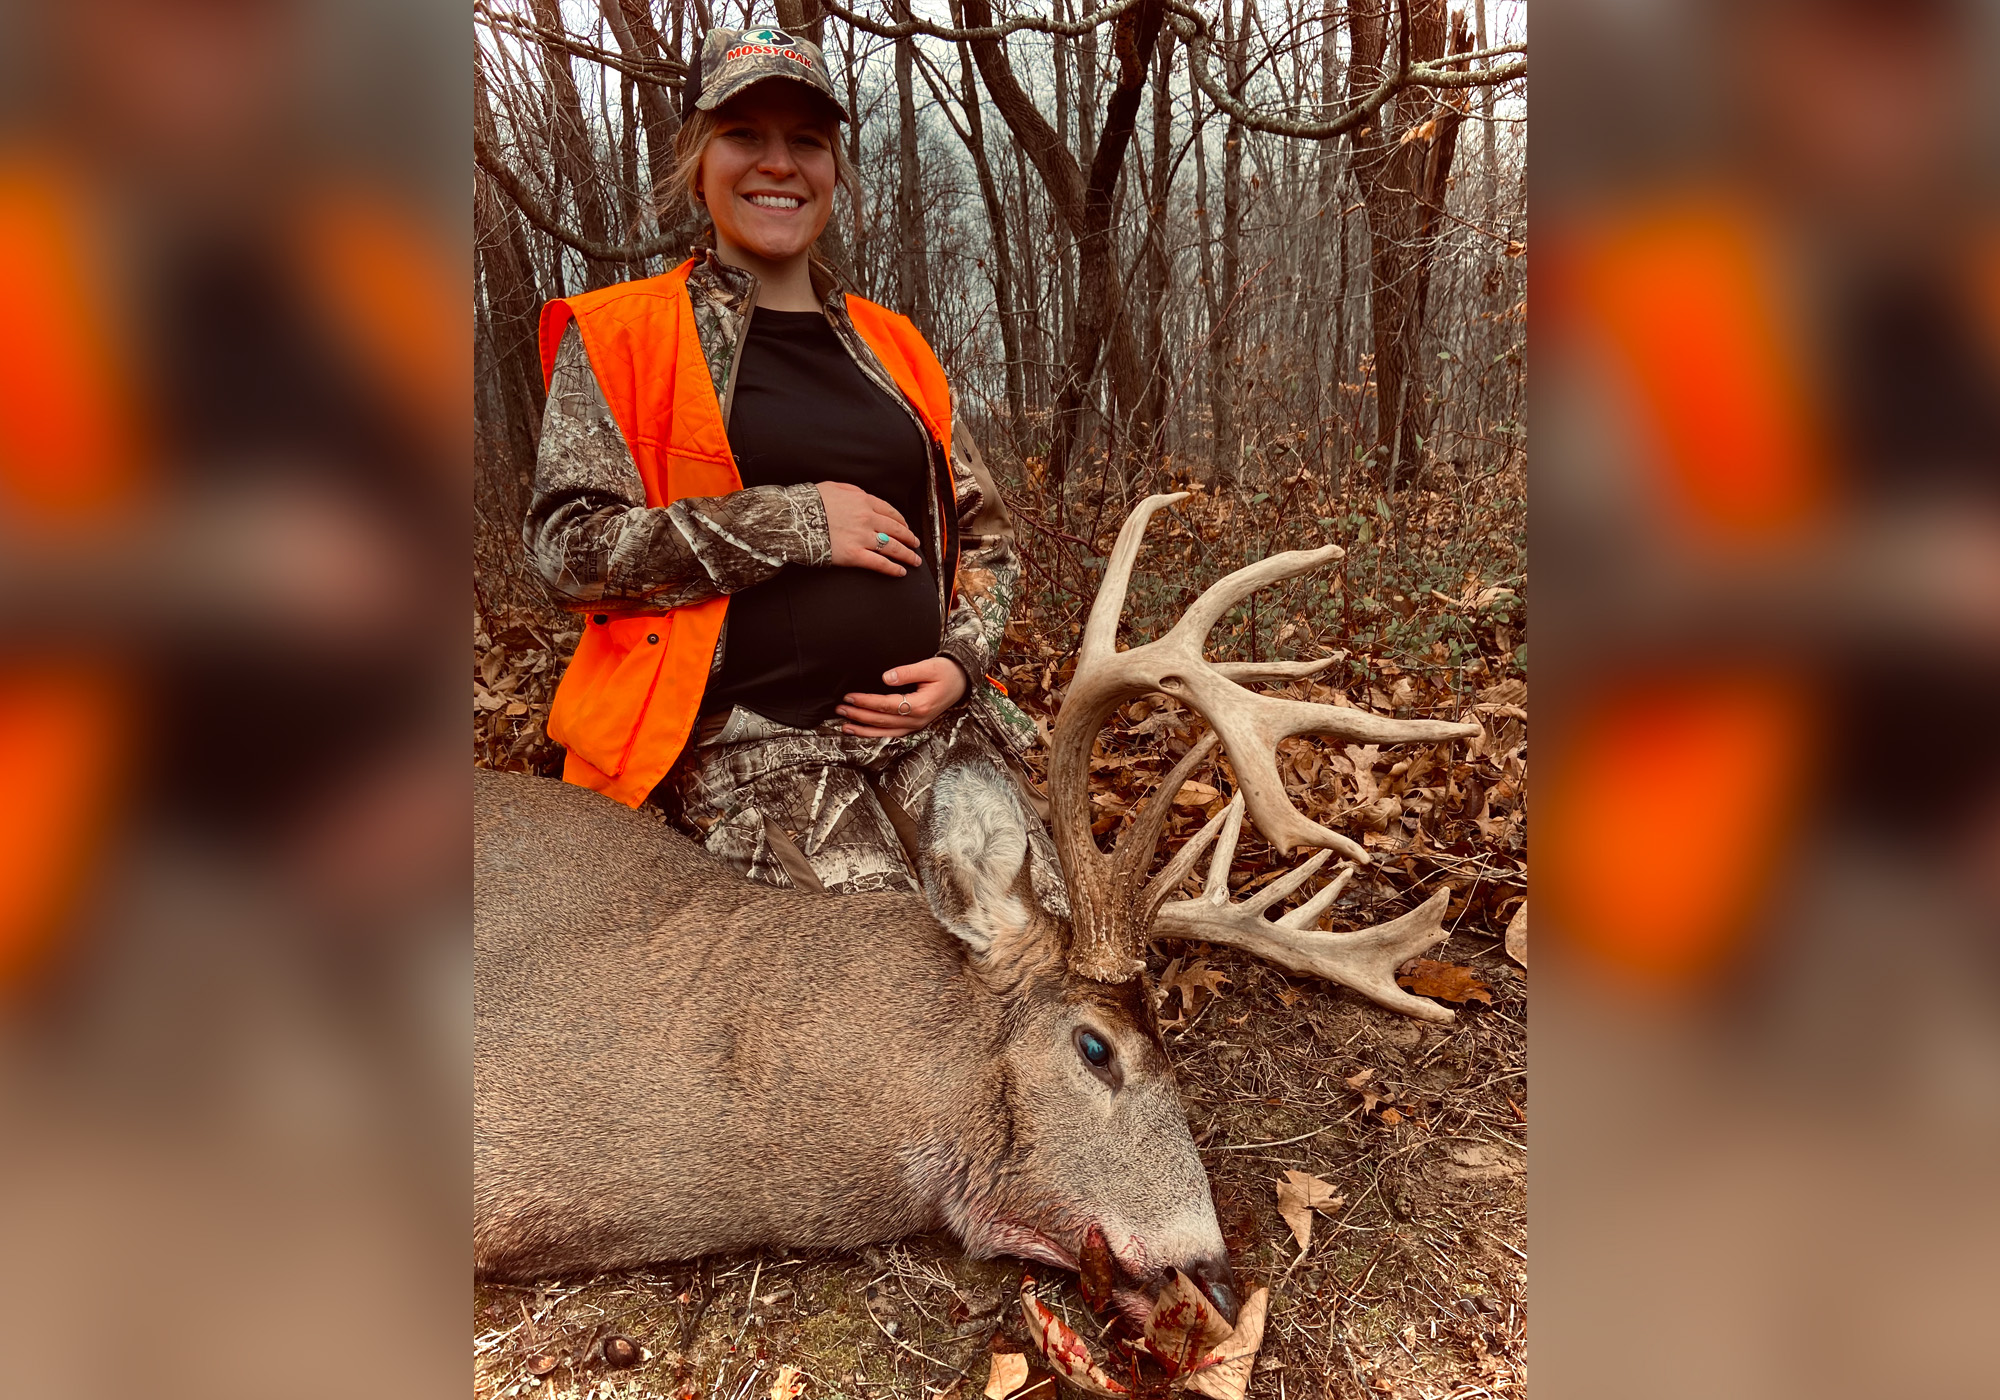 Two Years After Surviving a Tree Stand Fall, Ohio Hunter Tags 182-Inch Whitetail While Pregnant